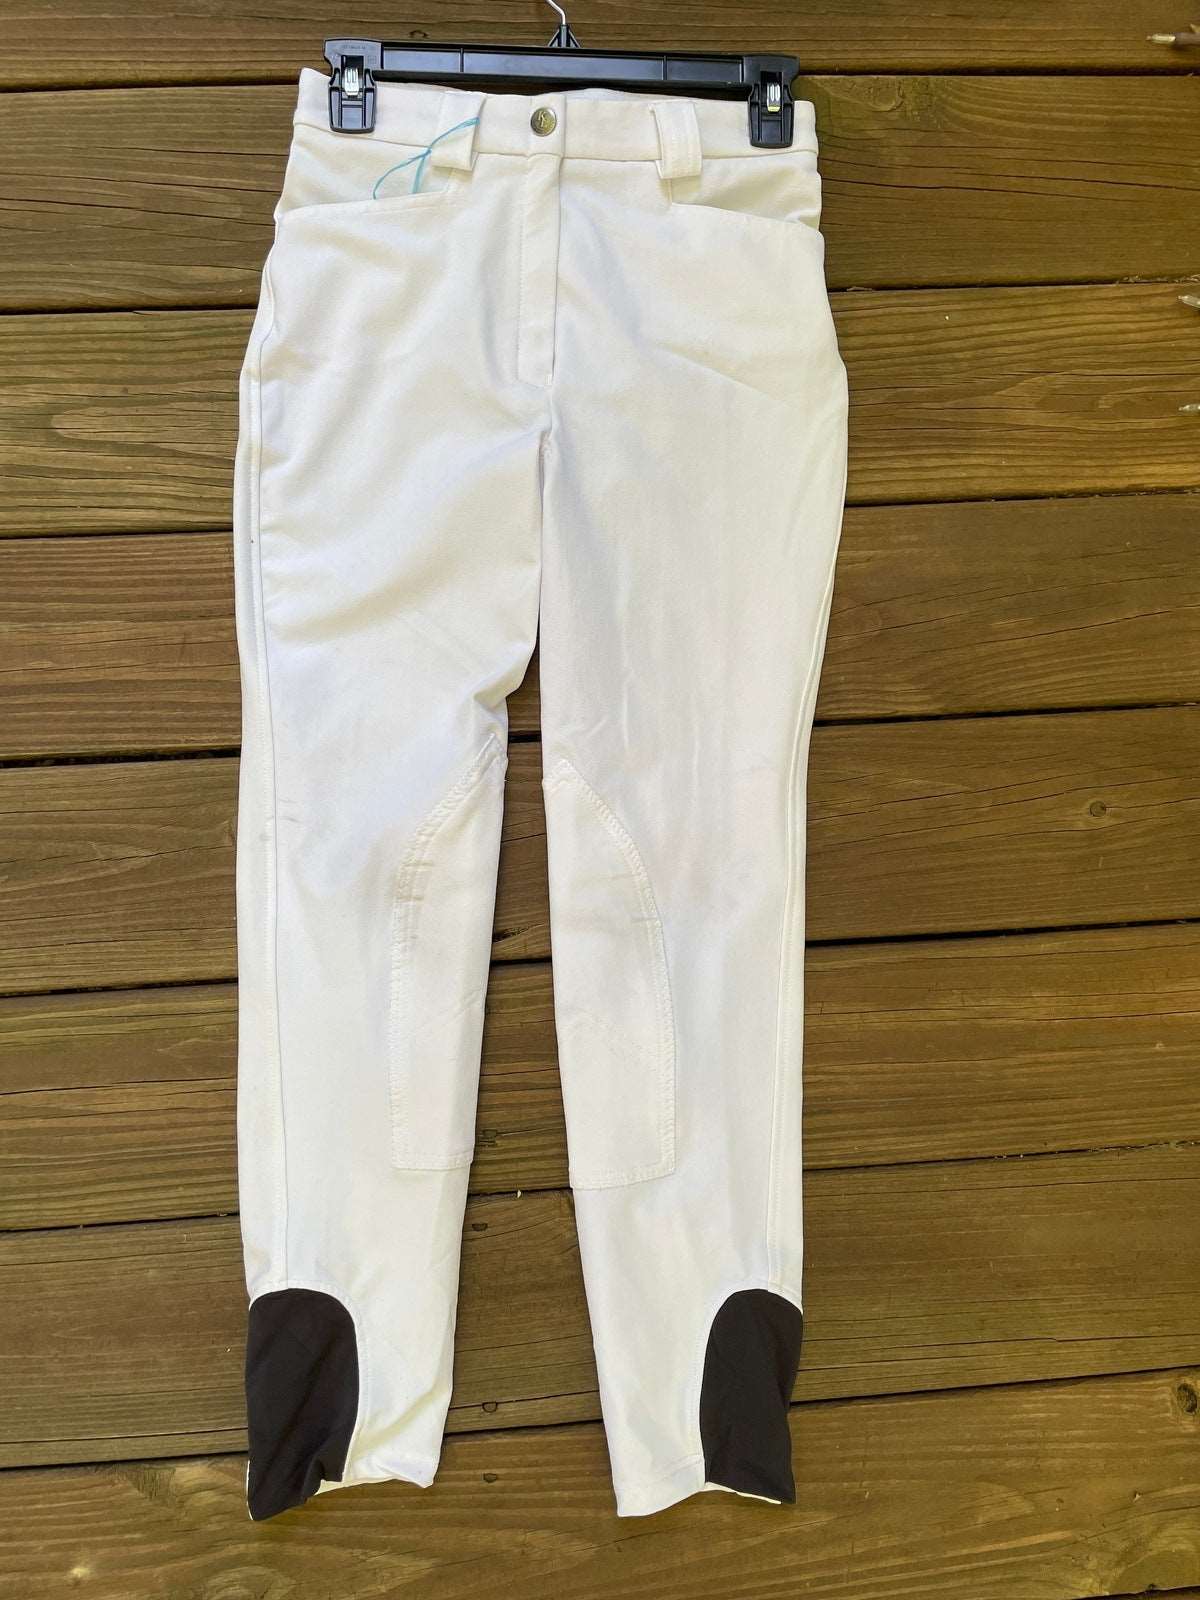 ThriftedEquestrian Clothing Youth 13/14 Kingsland Knee Patch Breeches - Youth 13/14